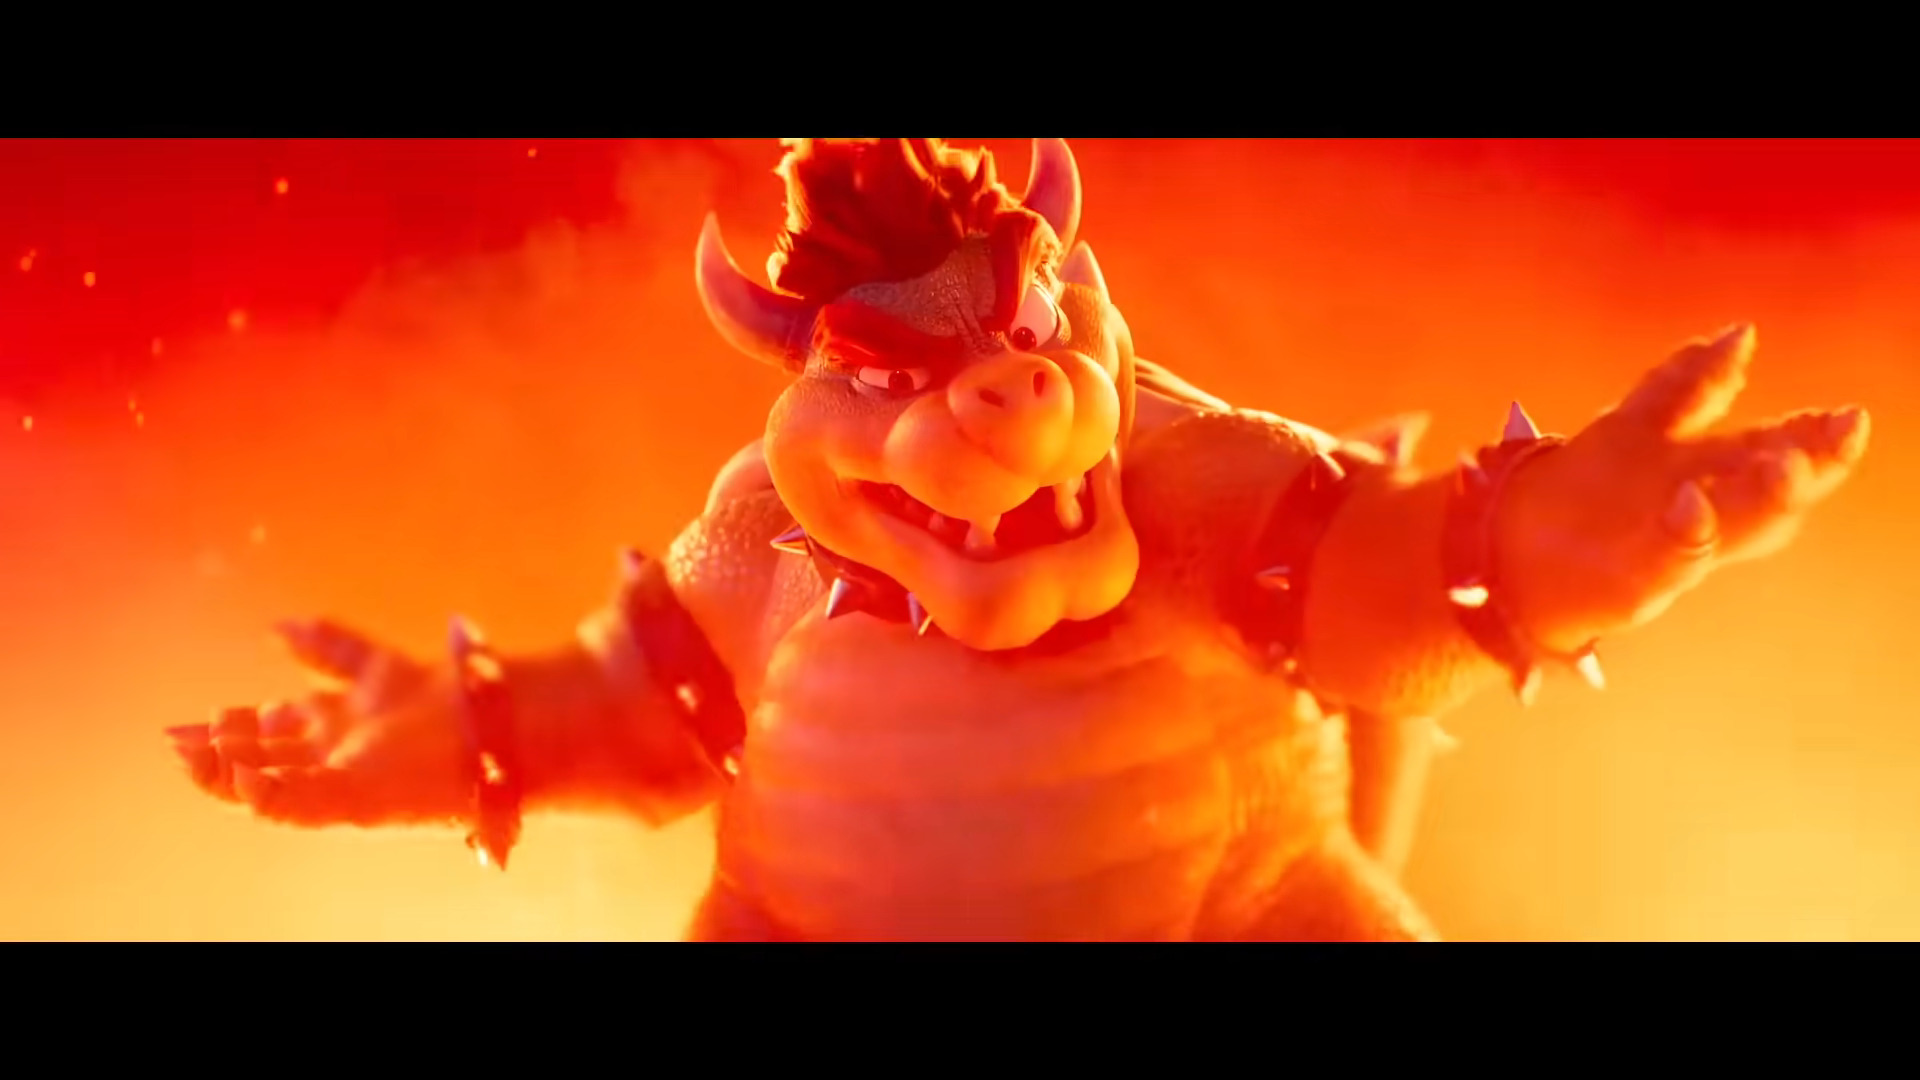 Bowser (Jack Black) debuts in all his glory in The Super Mario Bros. Movie (2023), Illumination Entertainment